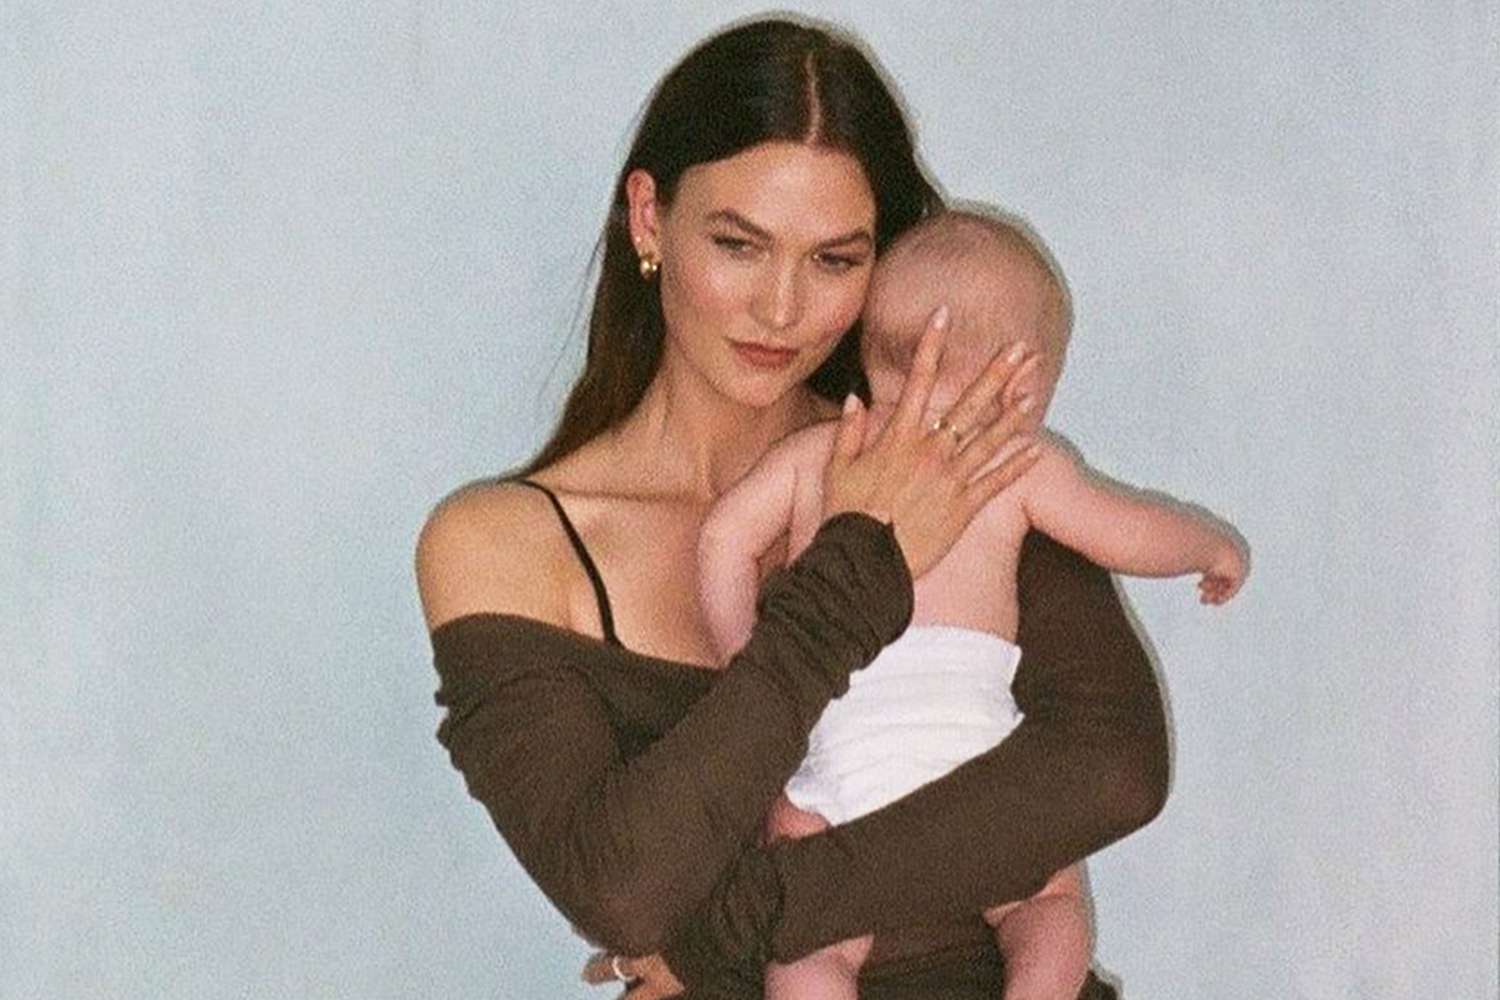 Karlie Kloss Celebrates Her 'Sweet Little' Son Elijah with a Heartfelt Tribute on His First Birthday